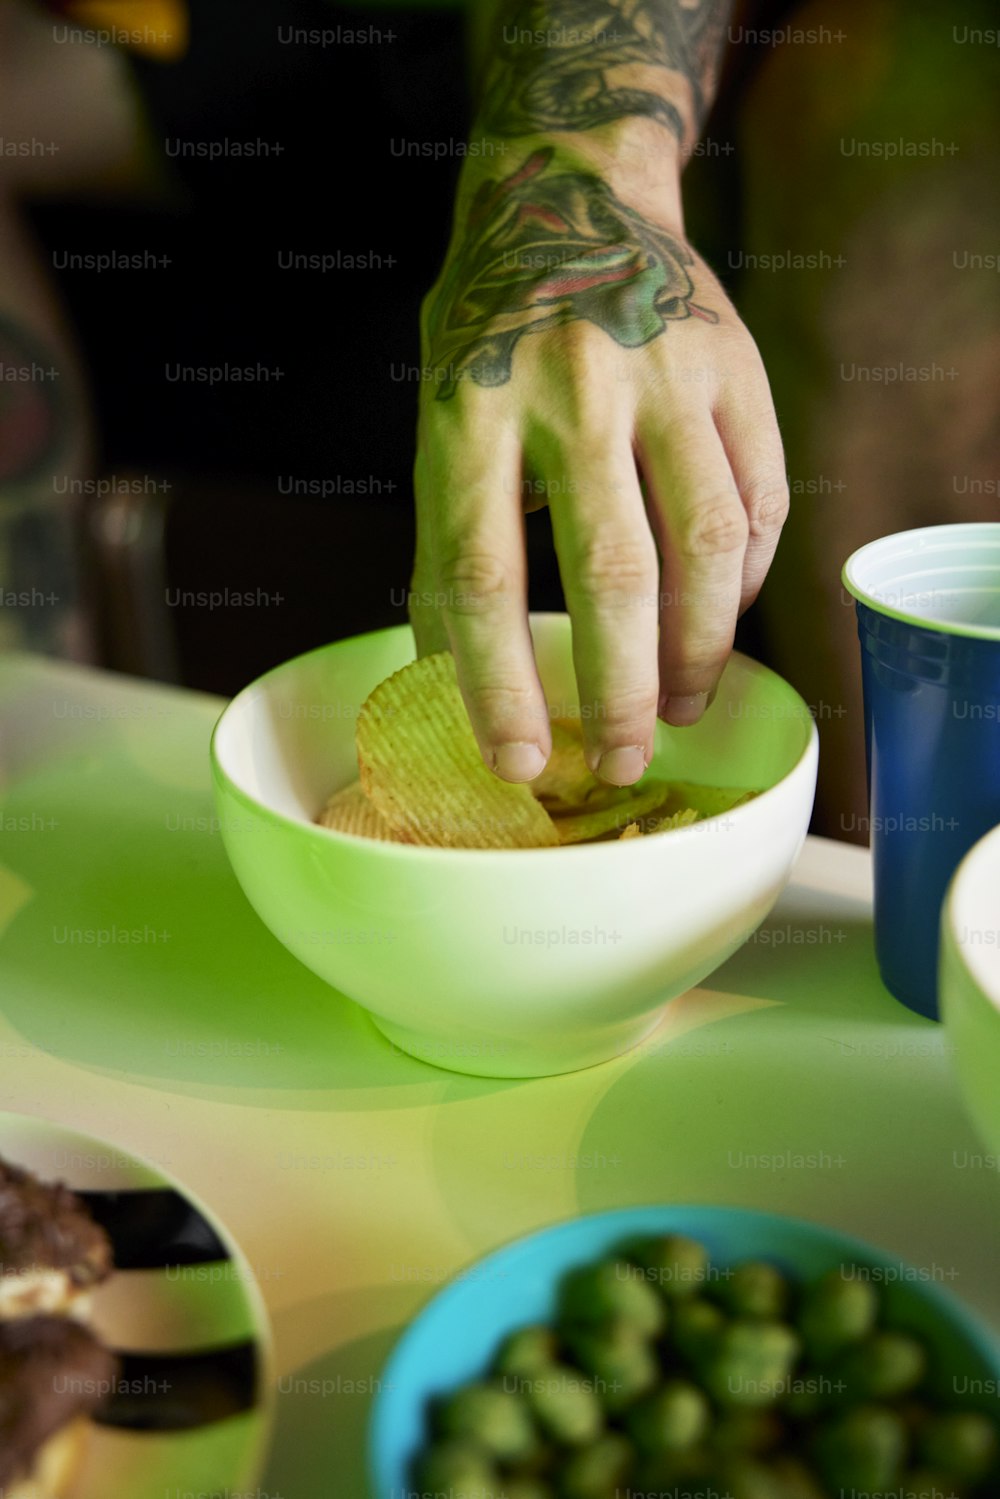 a man with a tattooed arm is dipping a potato into a bowl